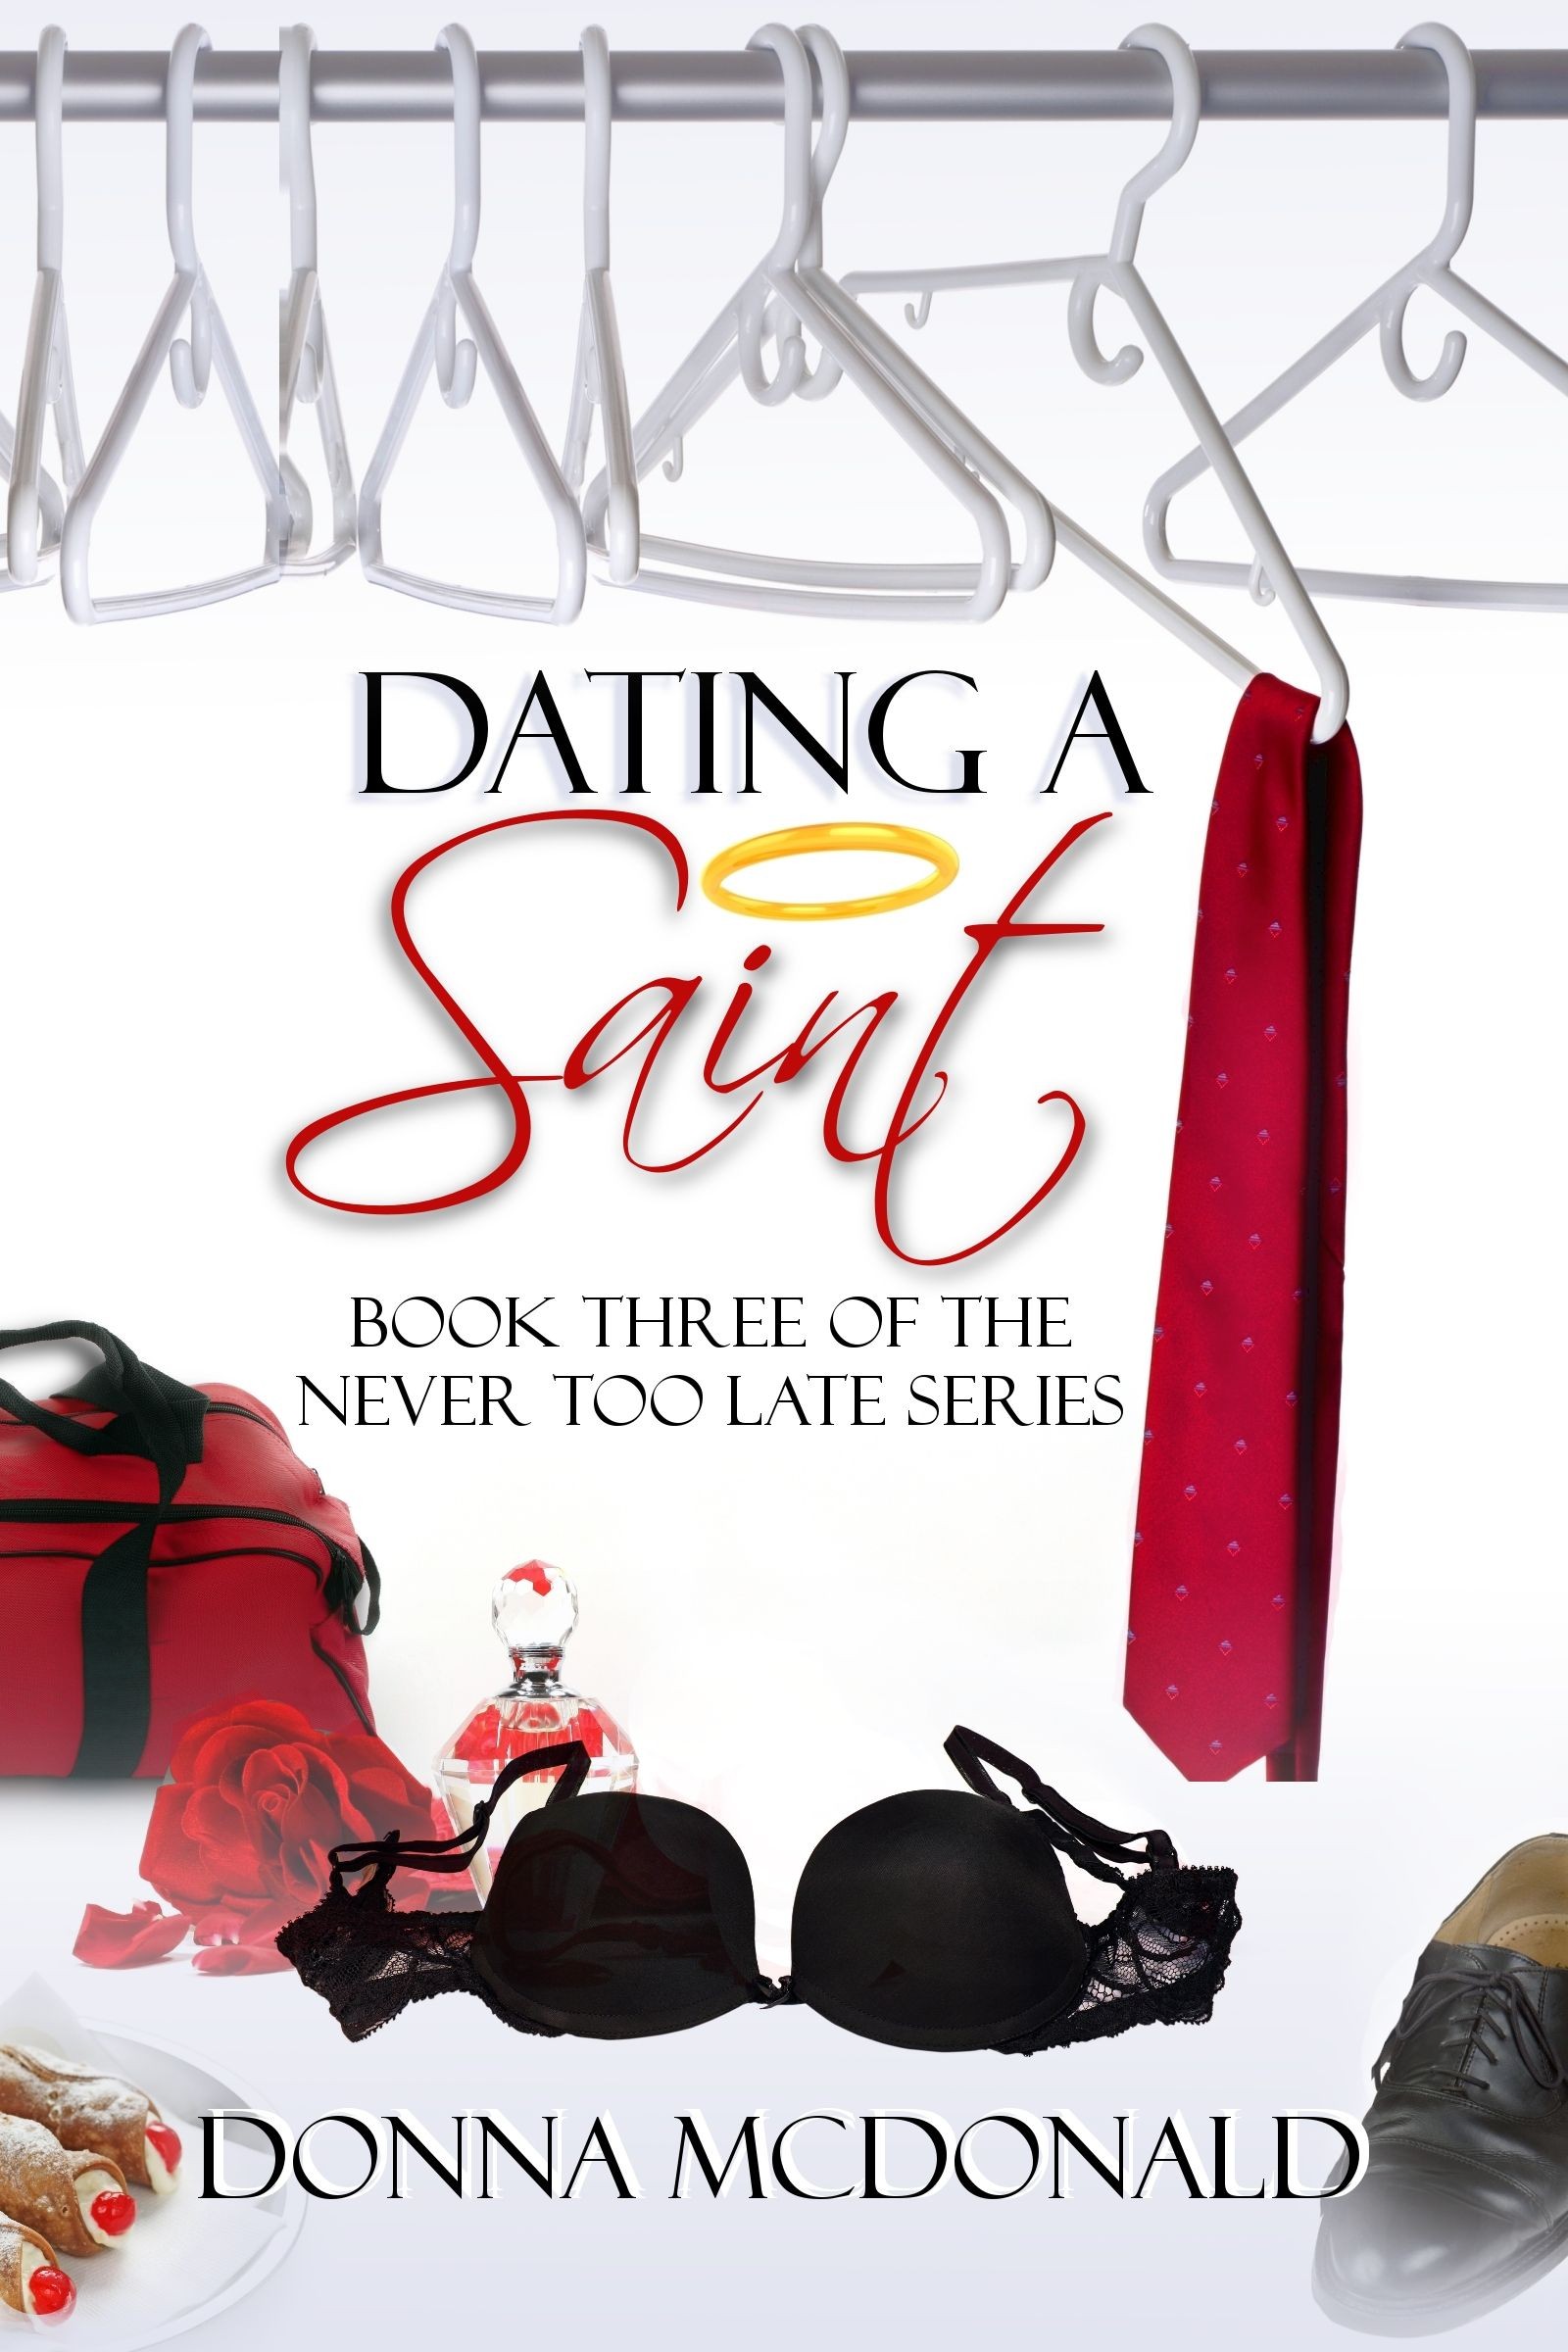 Dating A Saint (2011) by Donna McDonald